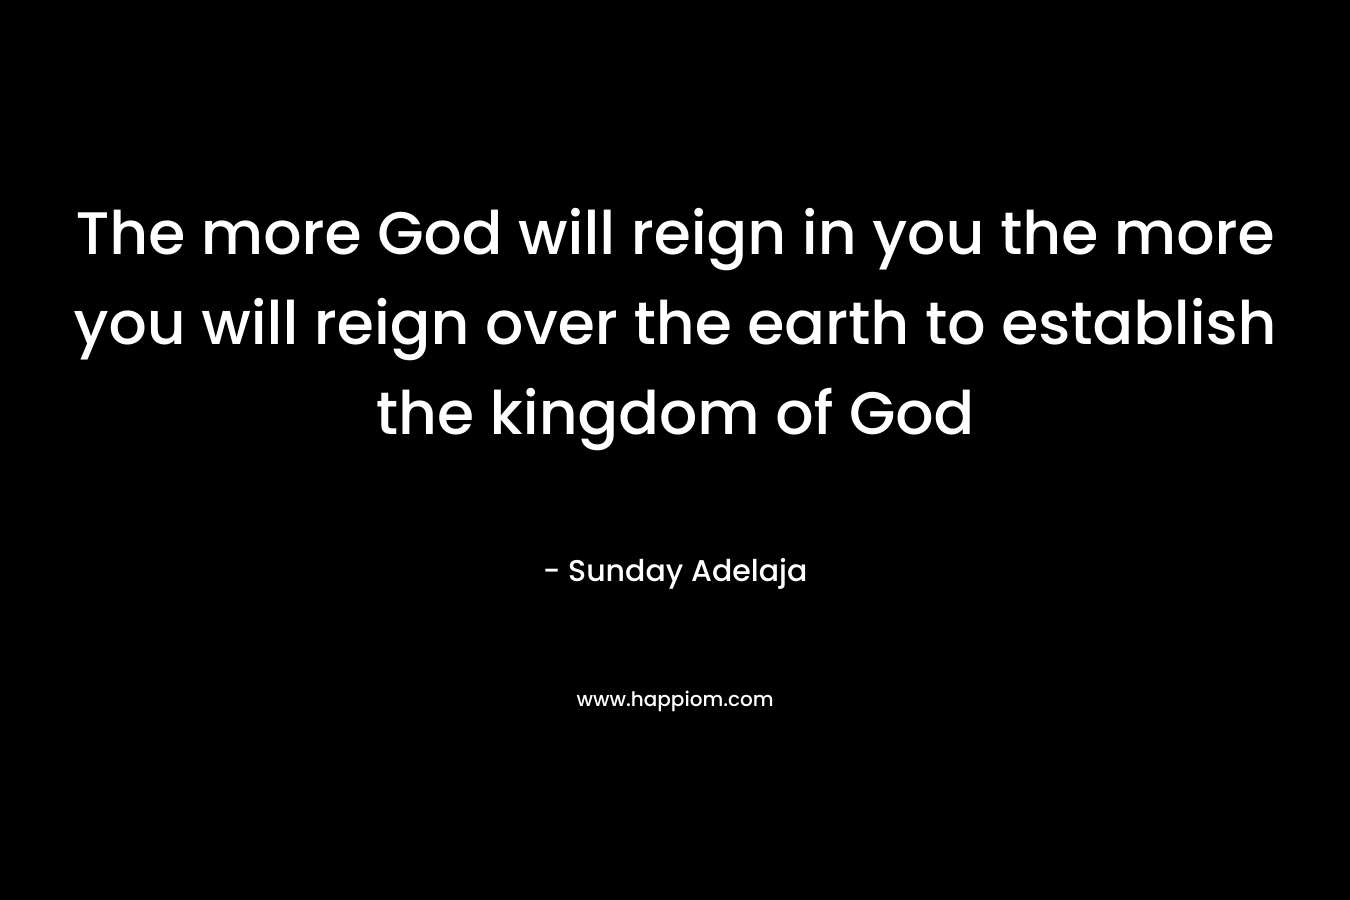 The more God will reign in you the more you will reign over the earth to establish the kingdom of God – Sunday Adelaja